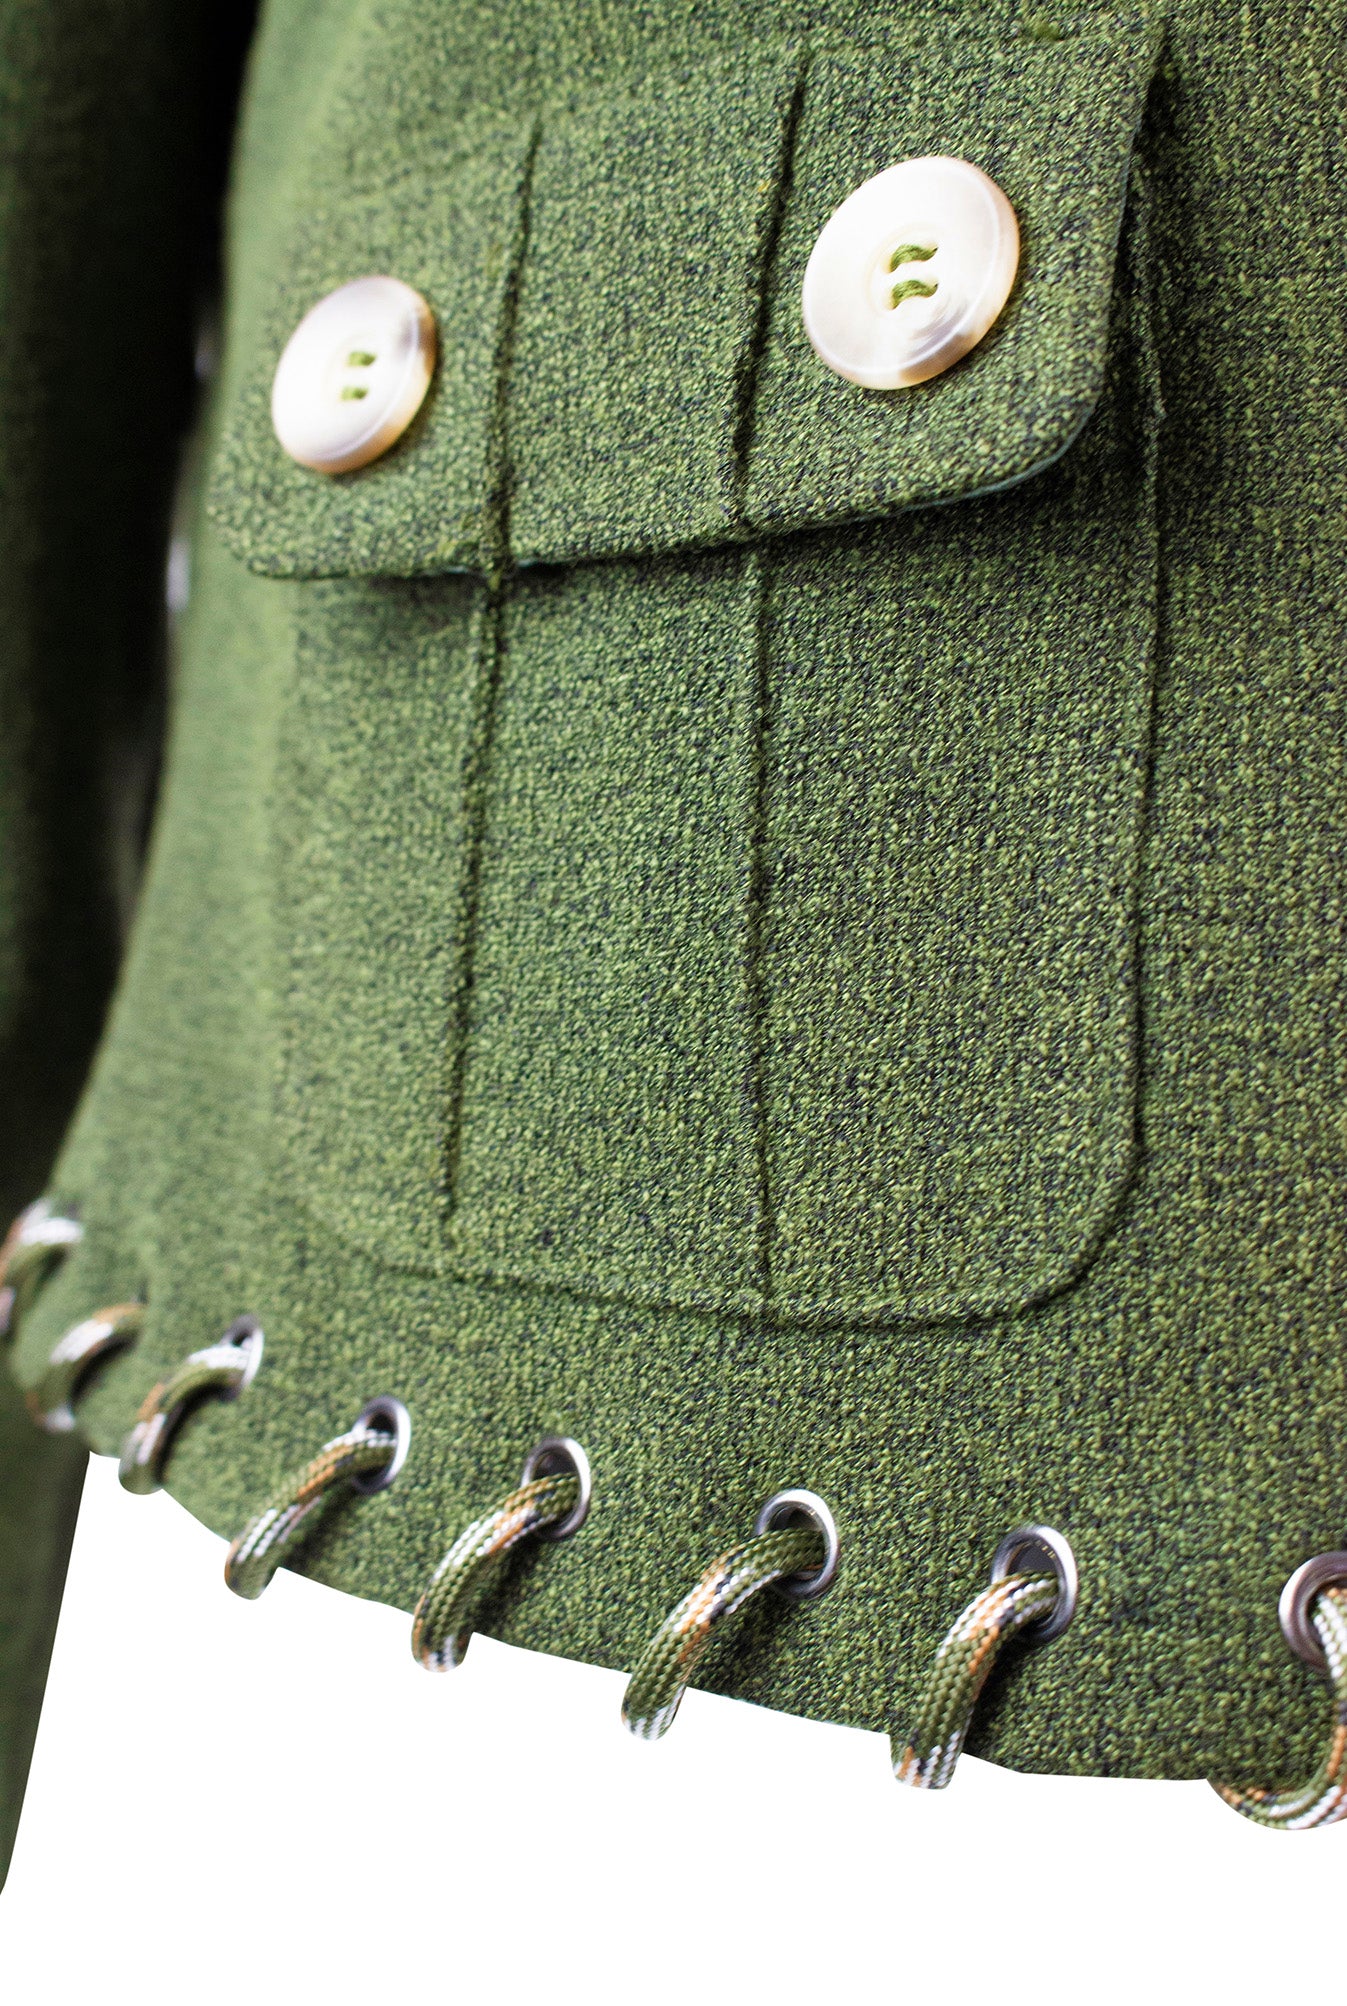 Army Green Button Down Jacket